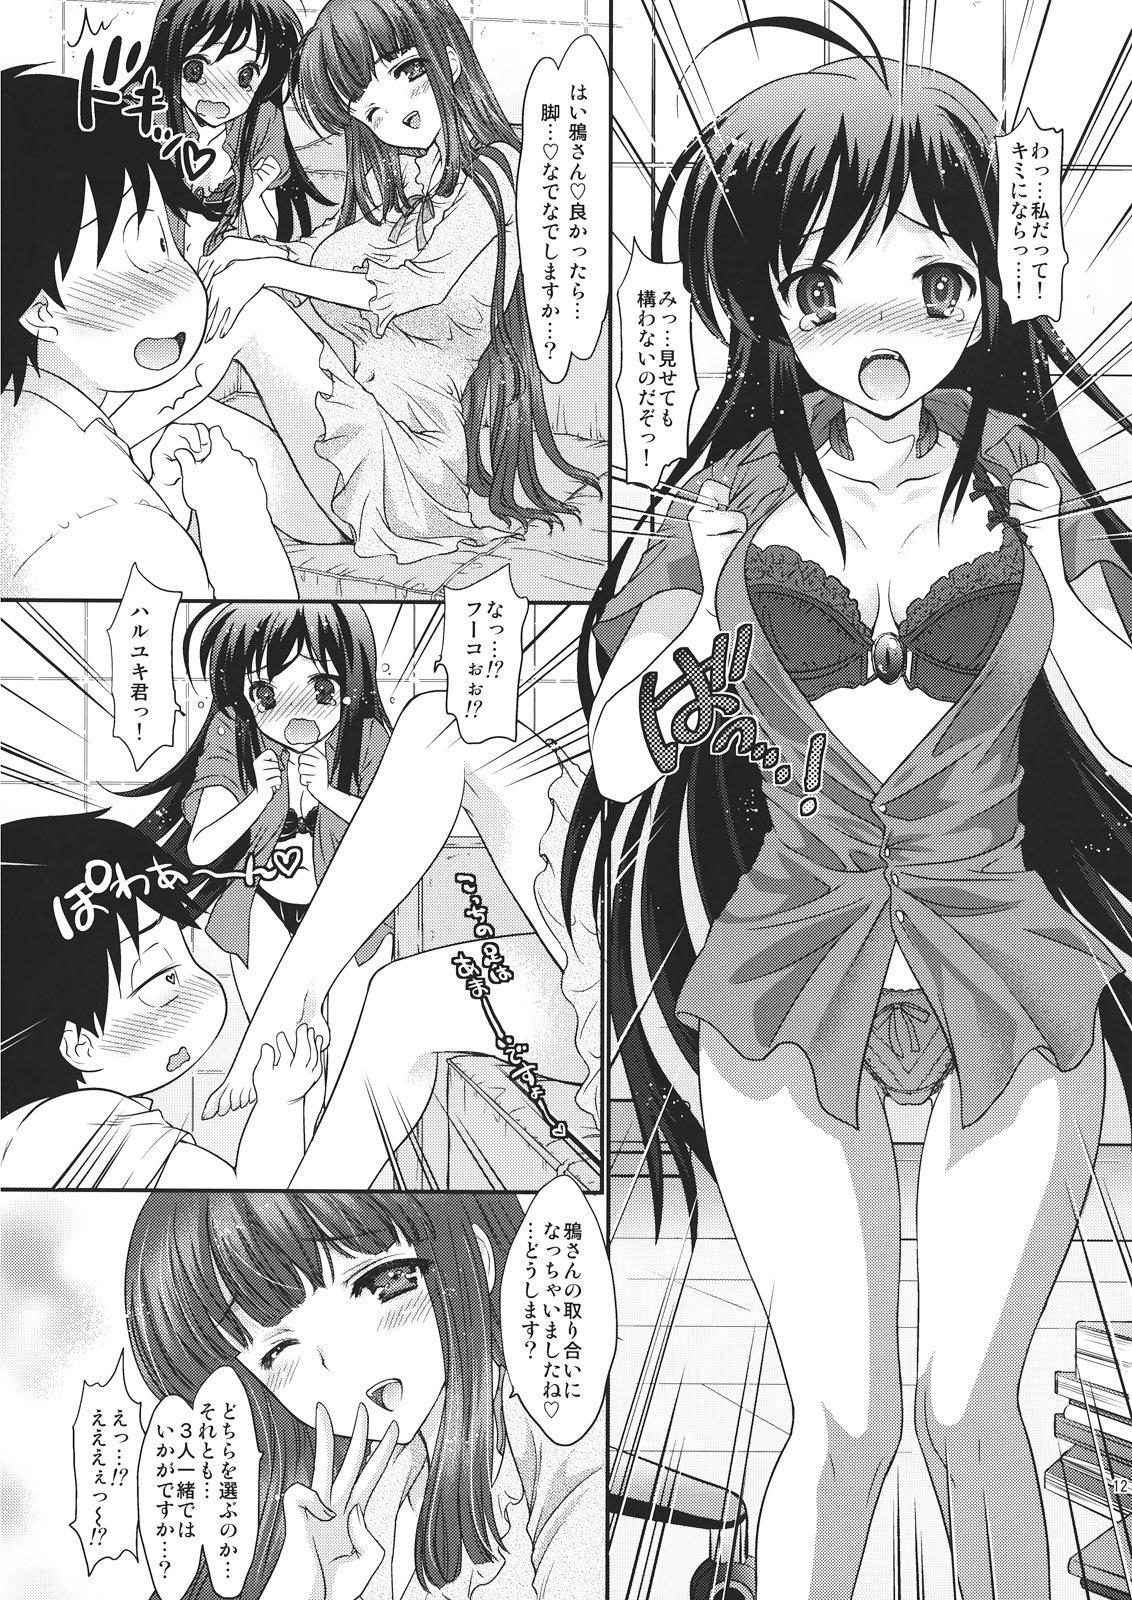 Babysitter Double Accel - Accel world Cumfacial - Page 12